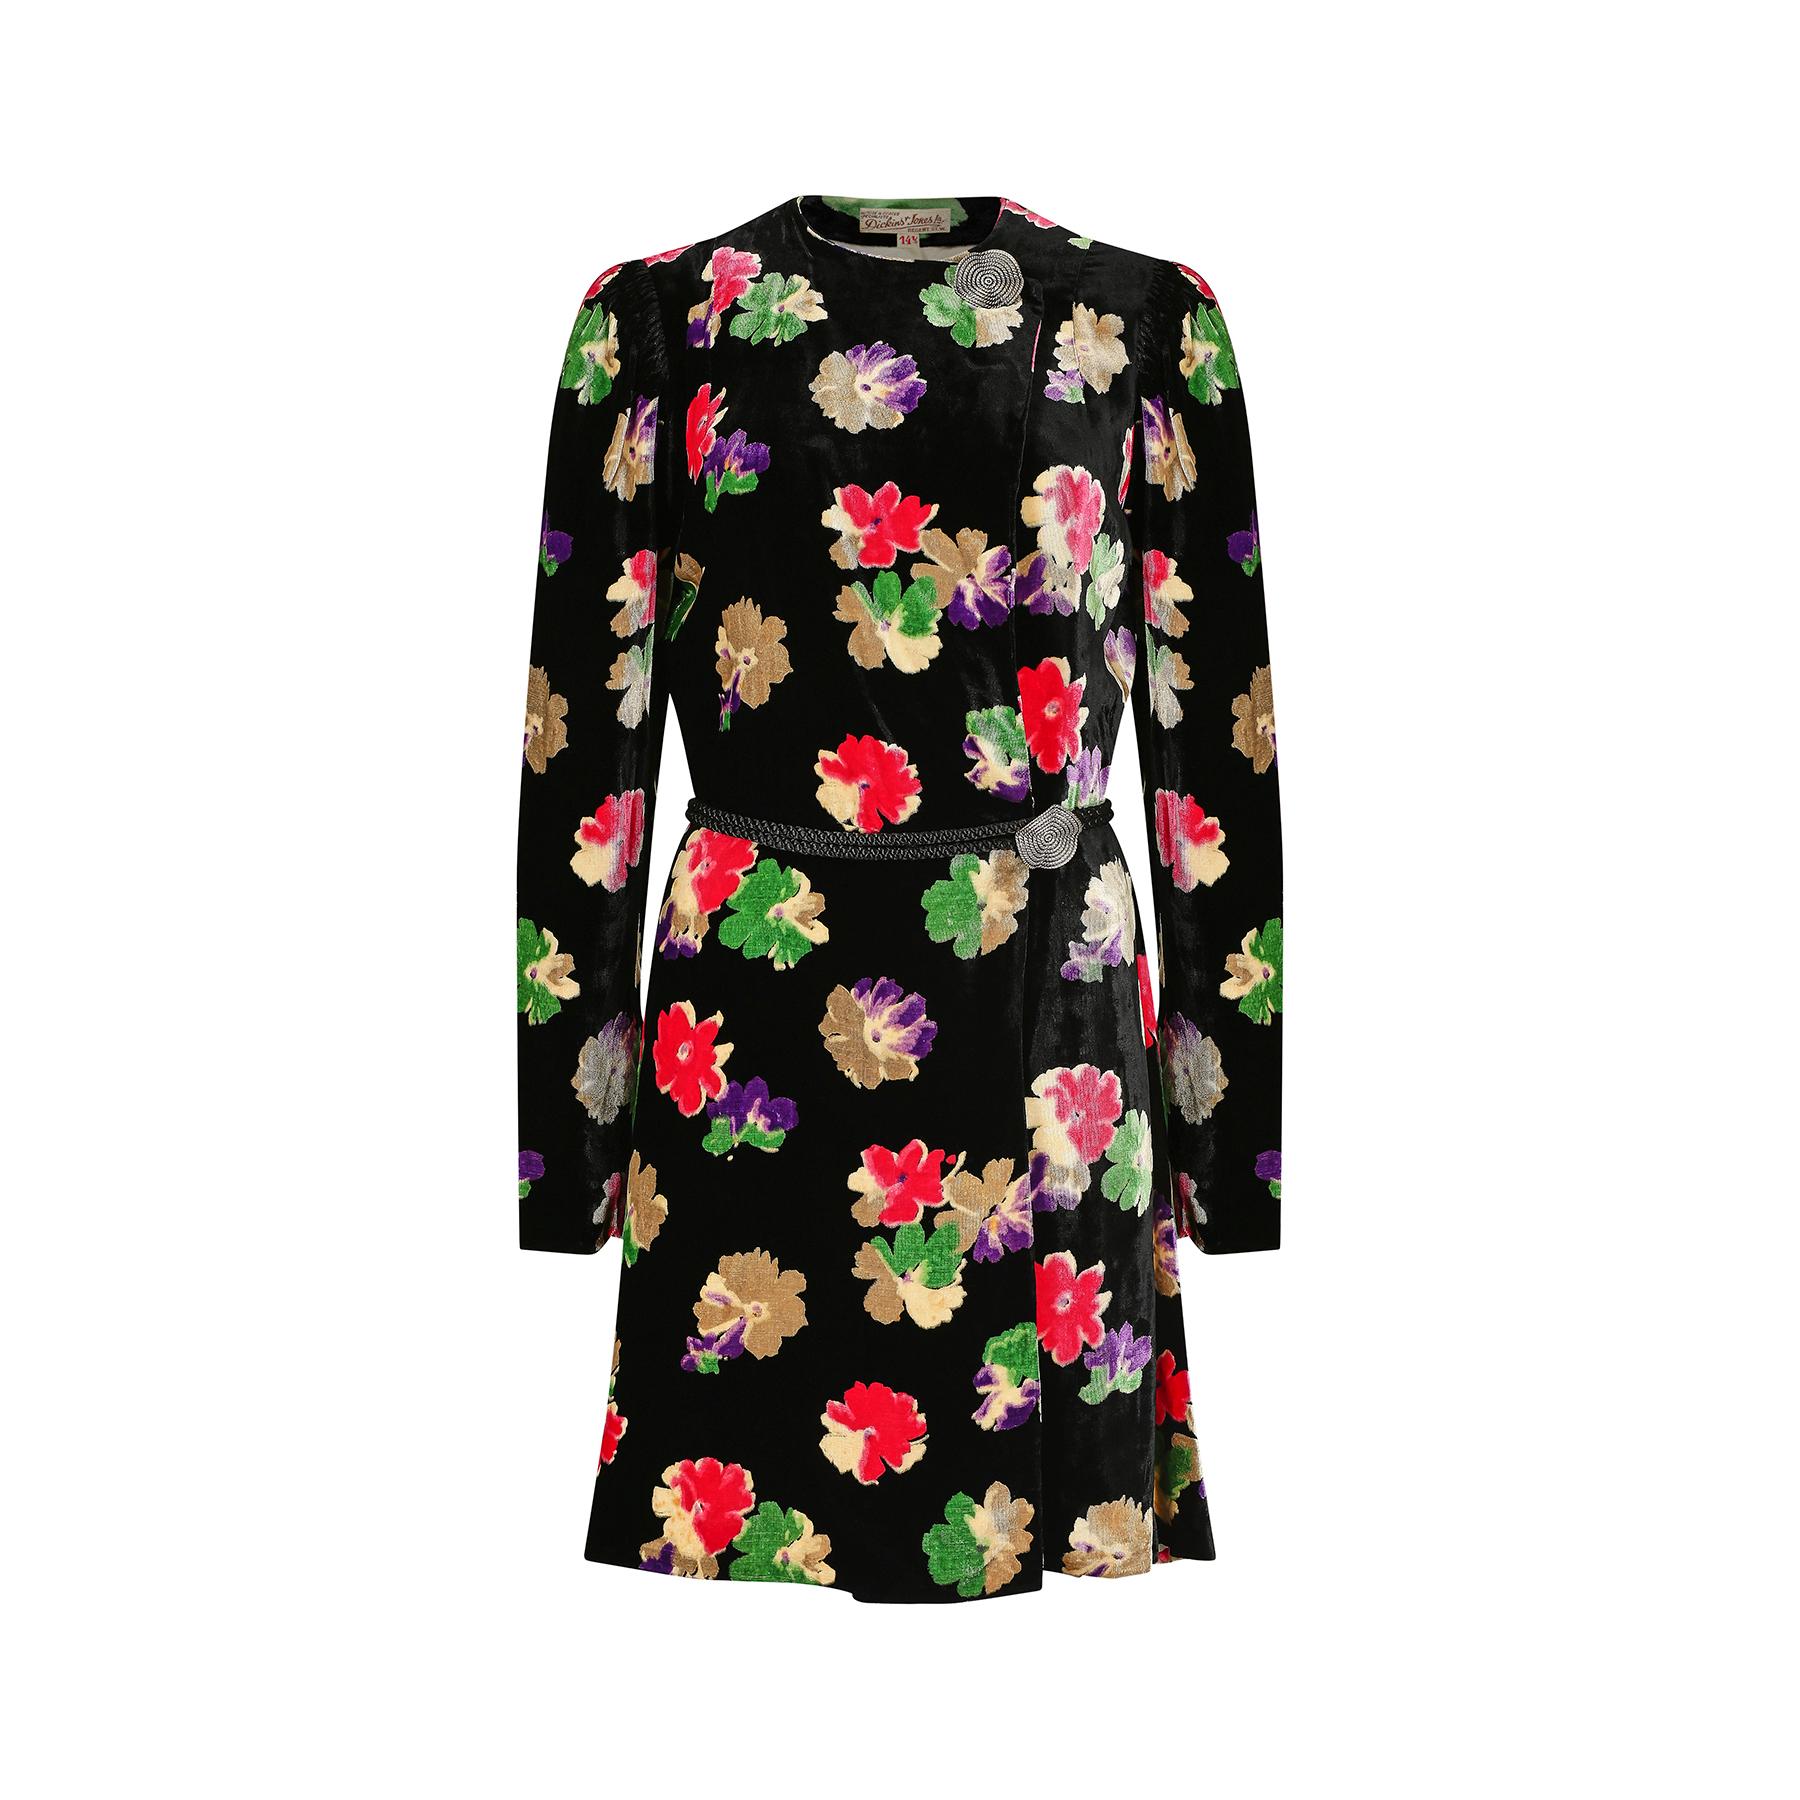 1930s panne silk velvet floral jacket which retailed at the upmarket department store Dickins and Jones in London's Regent Street.  It has a striking repeat floral print in cream, purple, cerise pink and green against a black background. The buttons